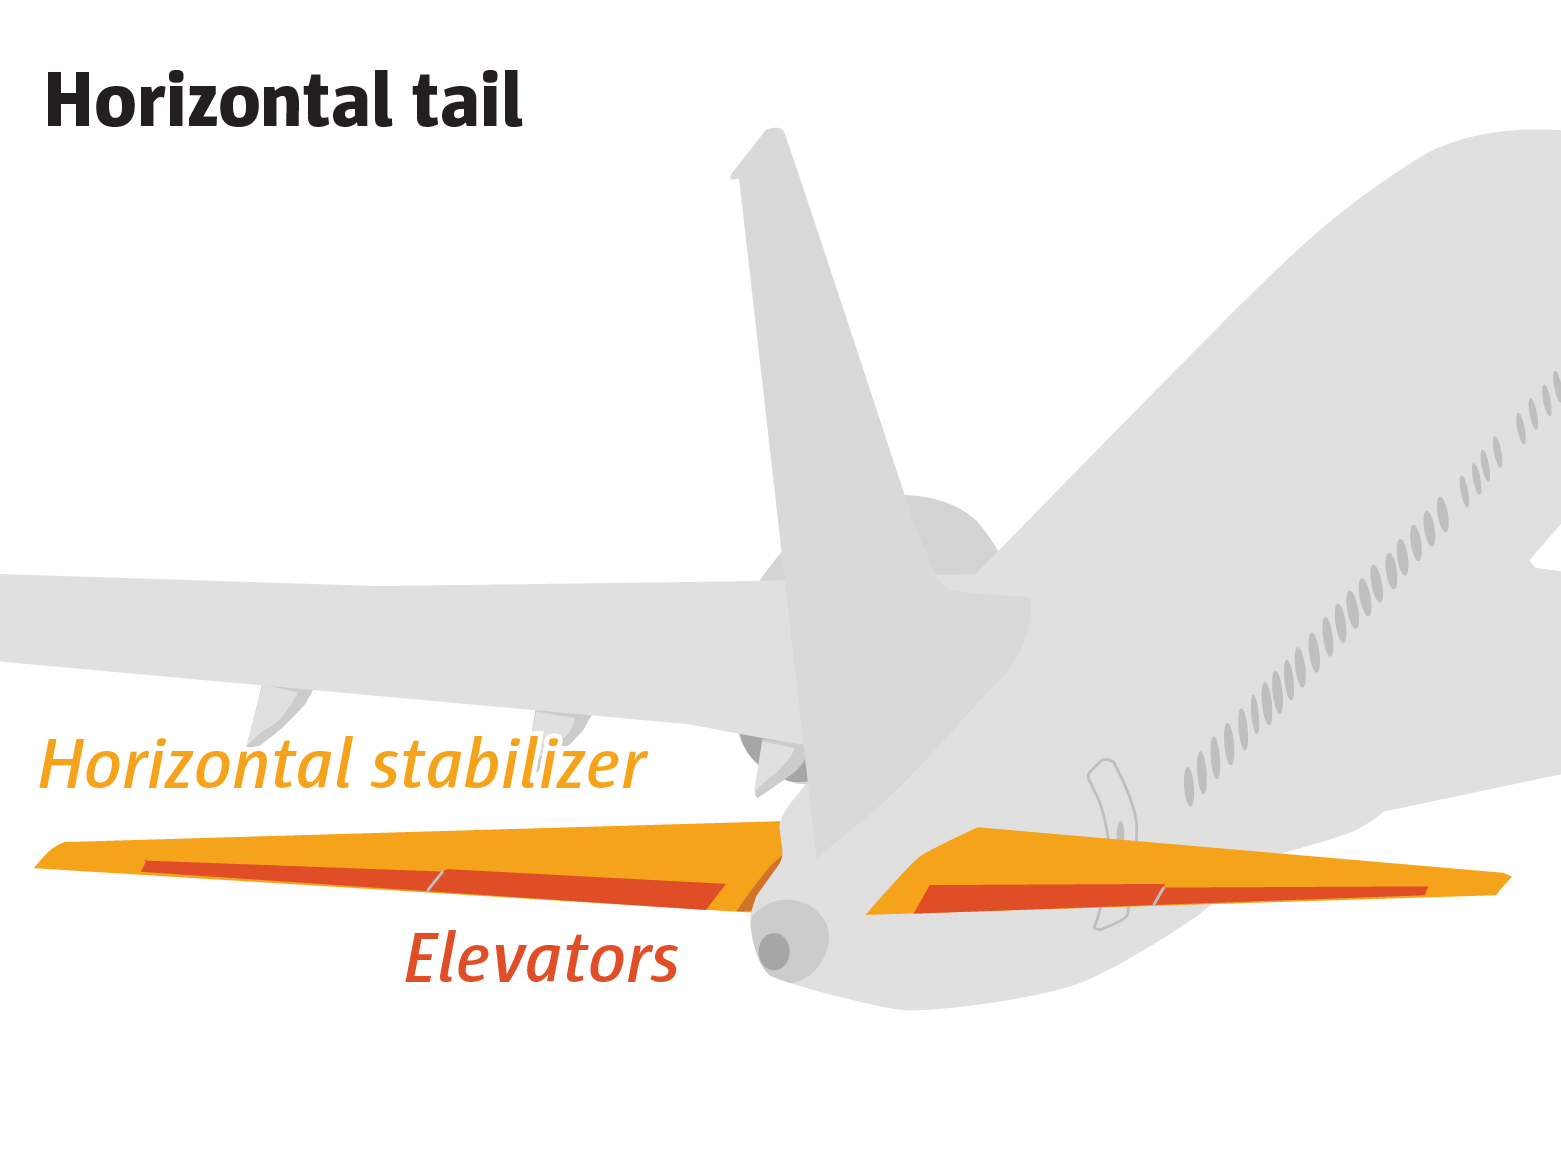 Airplane with the horizontal tail, at the rear of the plane, highlighted. Each side of the tail includes a stabilizer and an elevator.